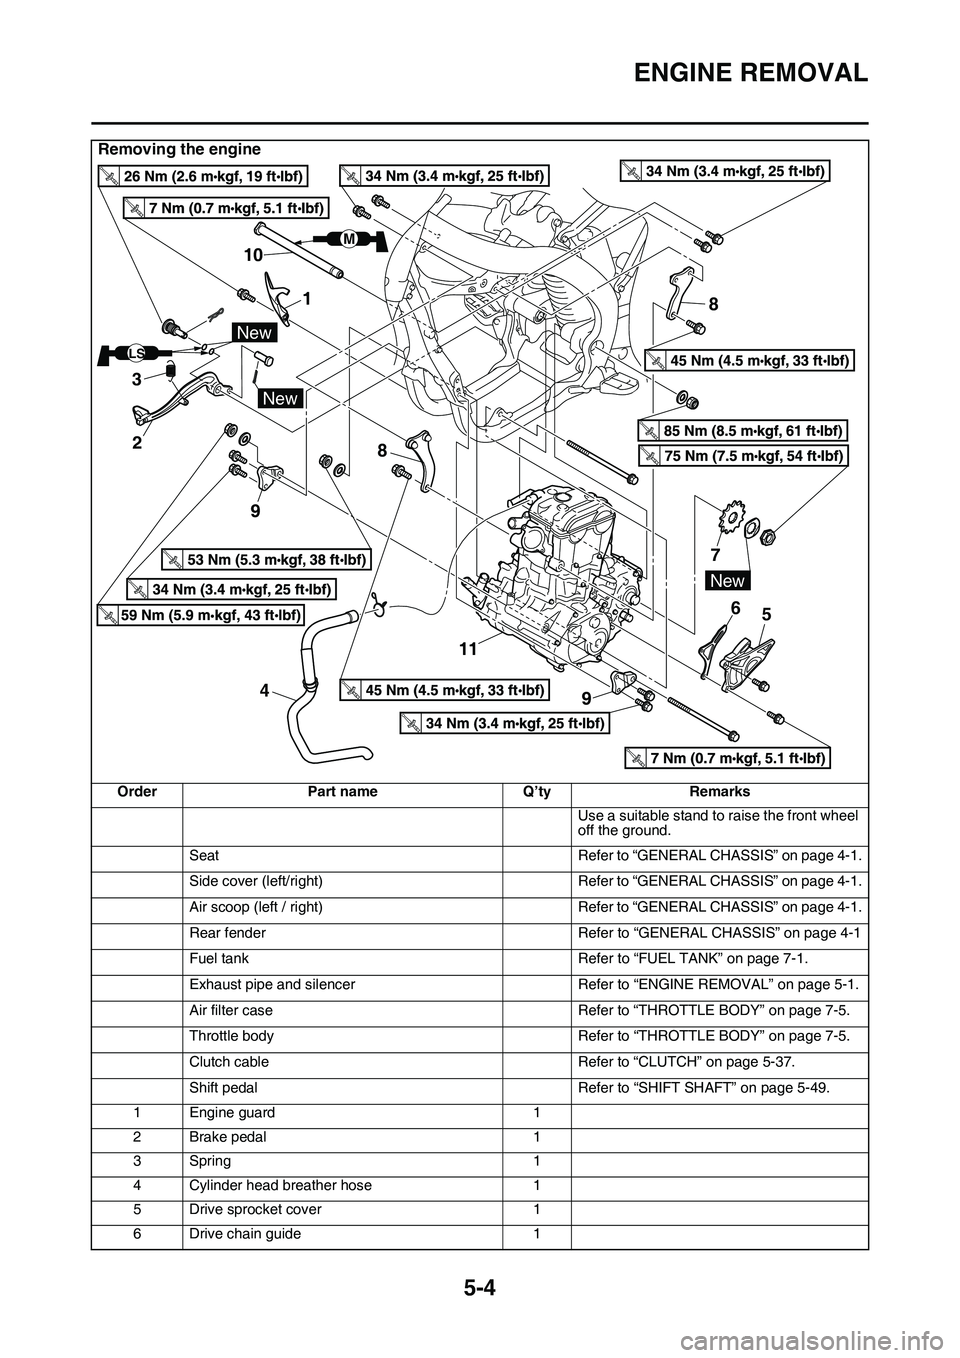 YAMAHA YZ450F 2014 Owners Guide ENGINE REMOVAL
5-4
Removing the engine
OrderPart name Q’tyRemarks
Use a suitable stand to raise the front wheel 
off the ground.
Seat Refer to “GENERAL CHASSIS” on page 4-1.
Side cover (left/rig